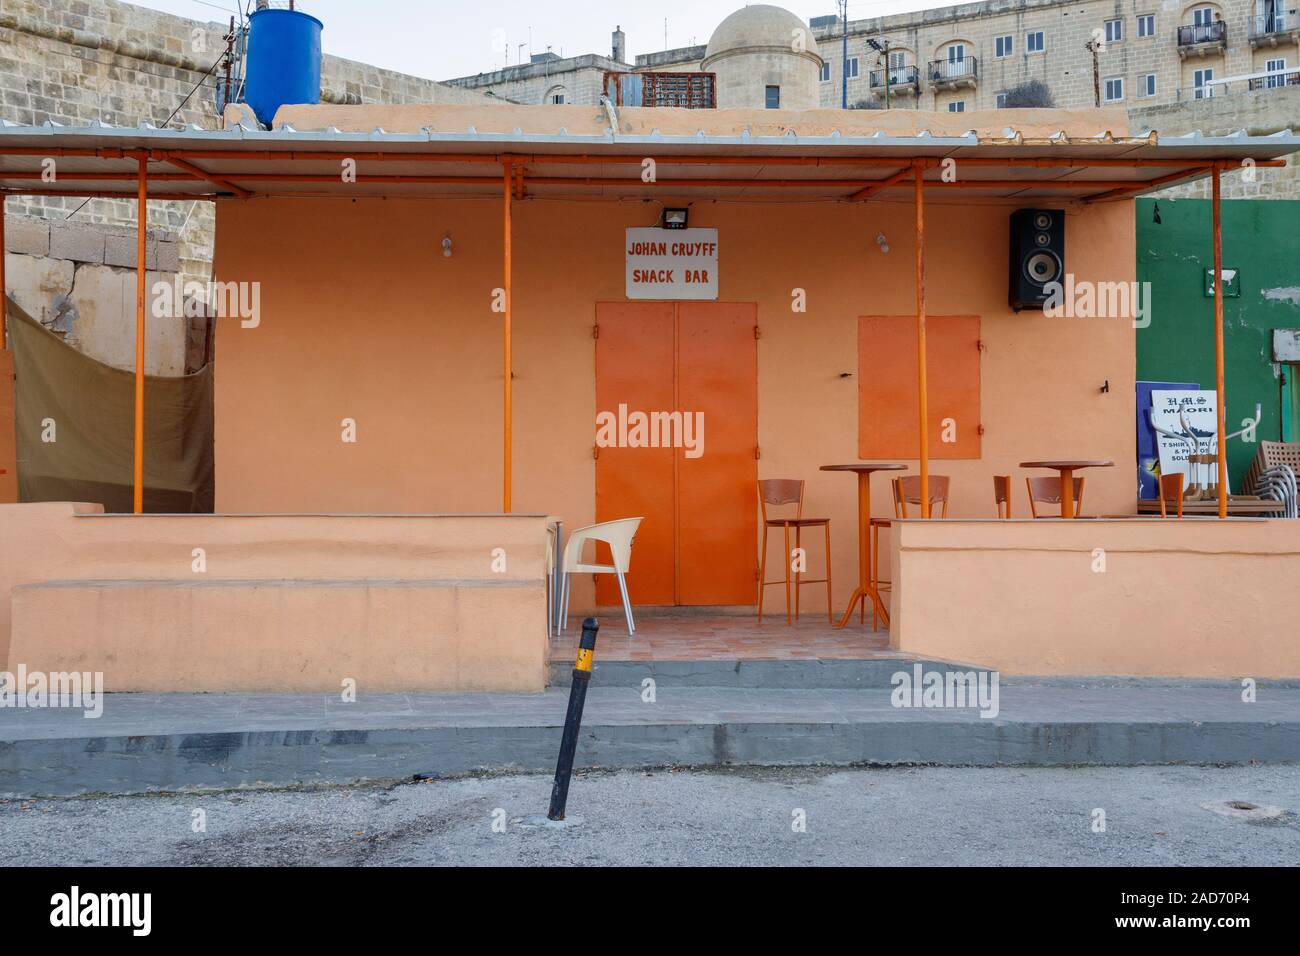 The Johan Cruyff Snack Bar at the fishermans wharf in Valletta, Malta. Exrenal view. Stock Photo